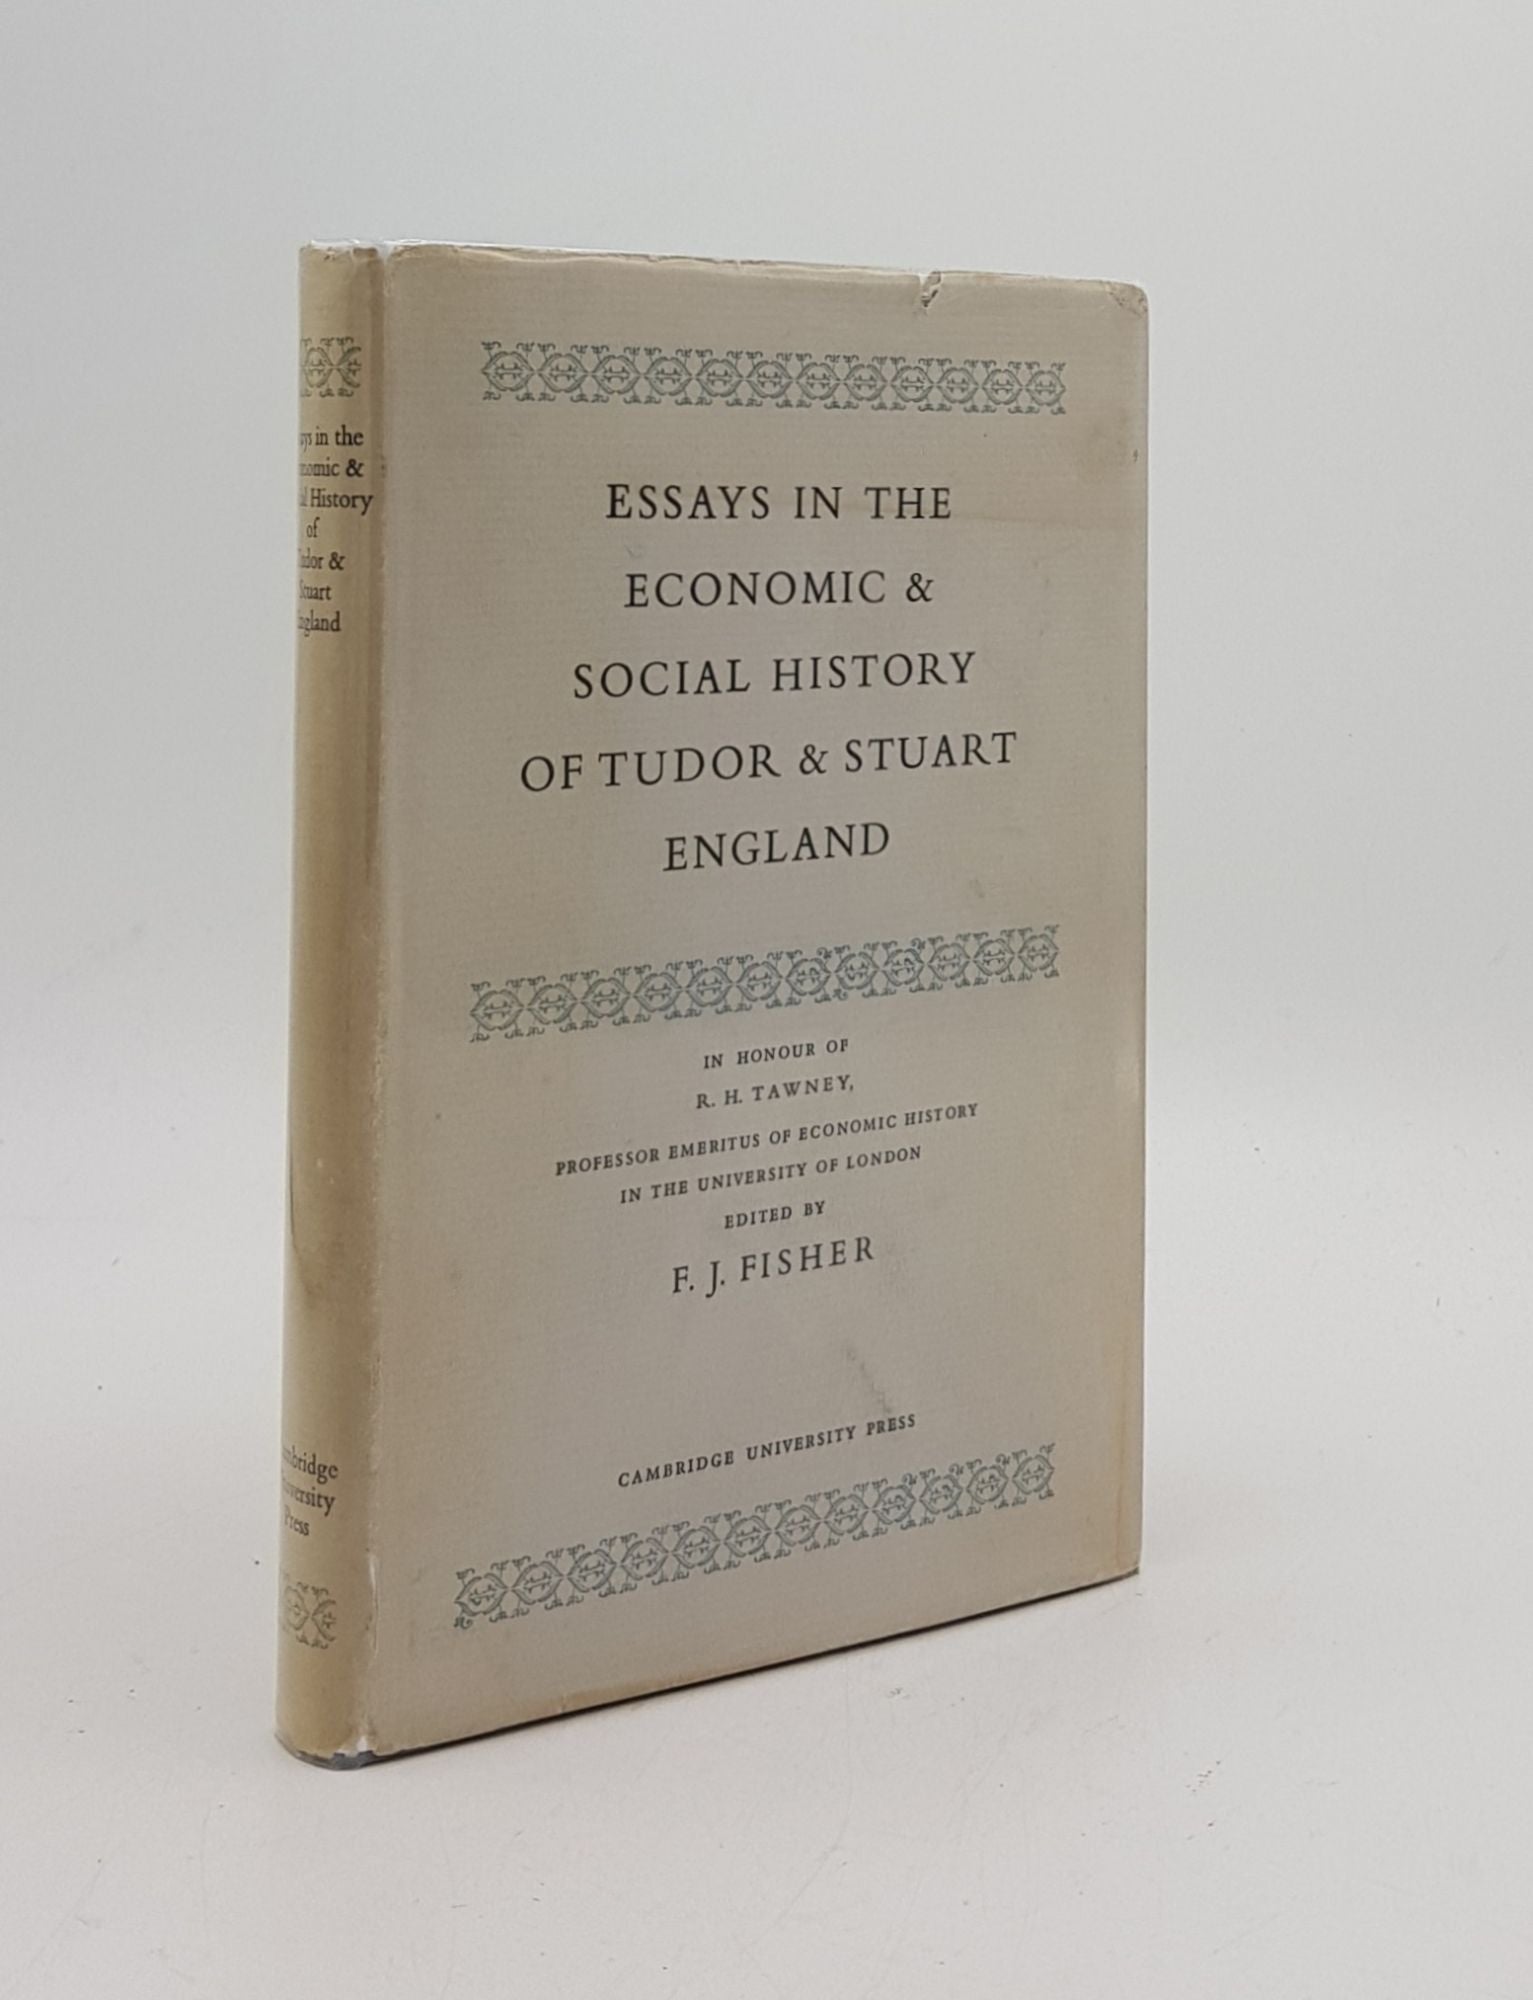 FISHER F.J. - Essays in the Economic and Social History of Tudor and Stuart England